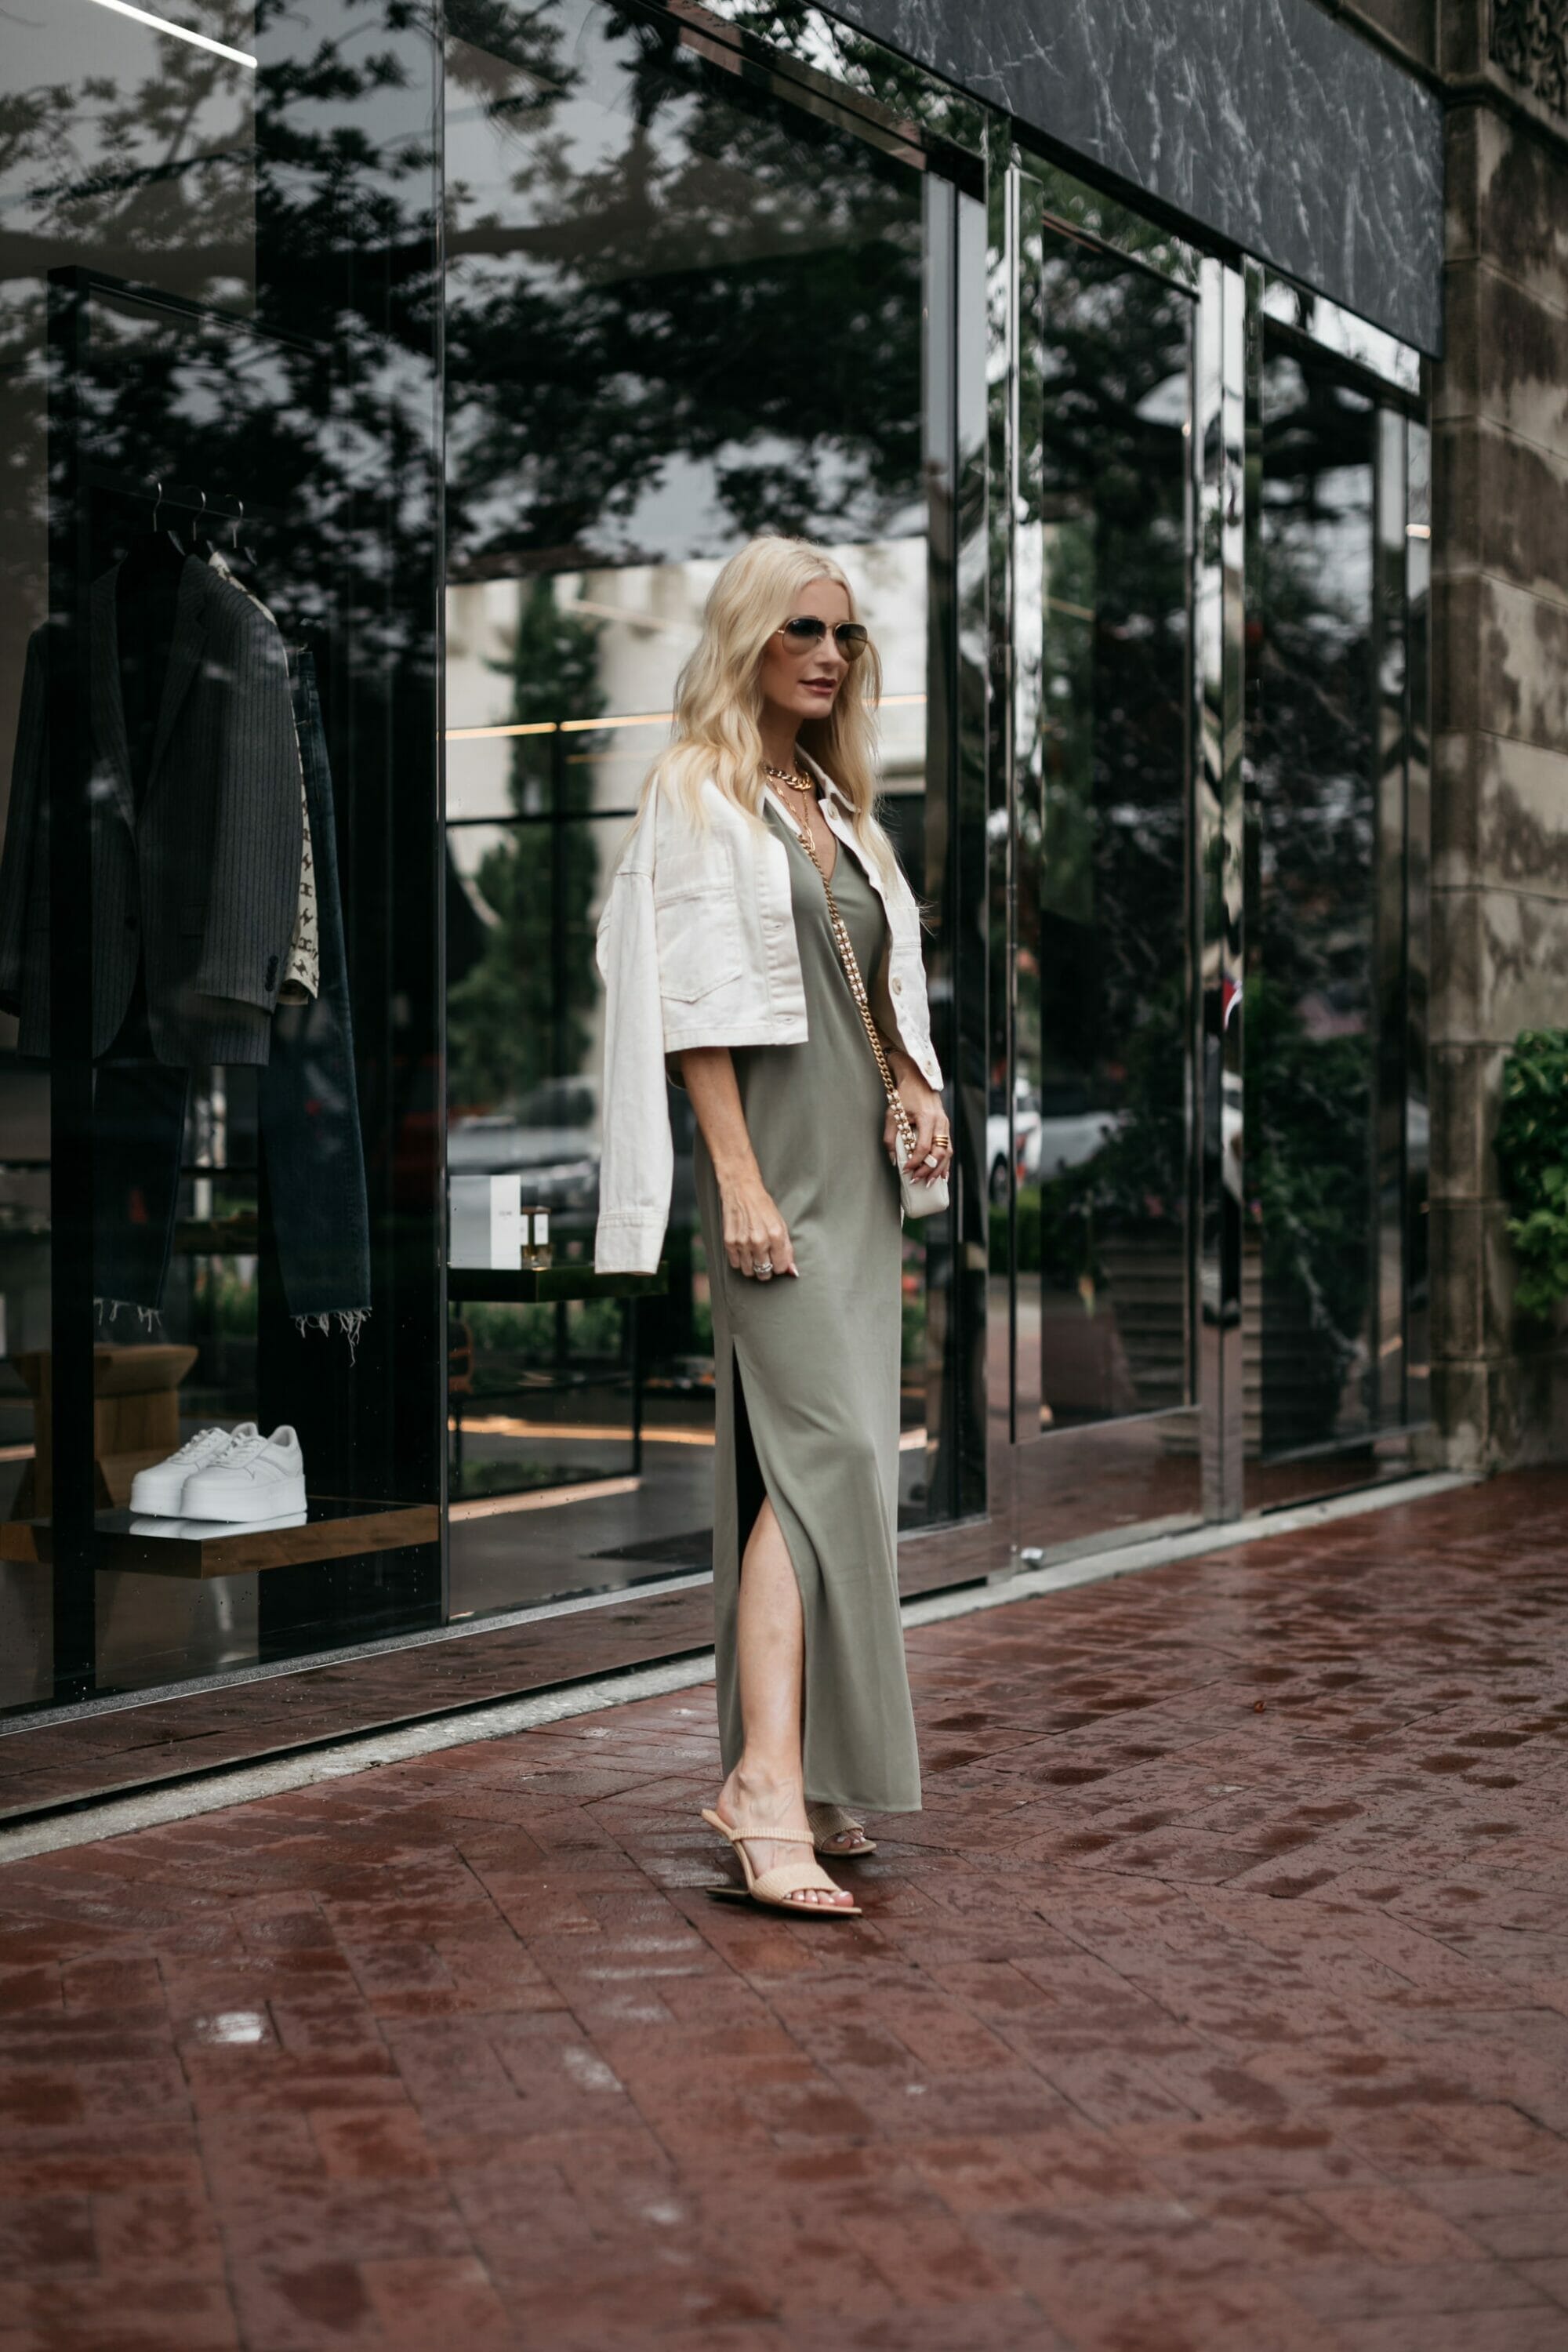 Over 40 Dallas fashion blogger wearing olive & ivory as one of 5 expensive looking color combinations. 